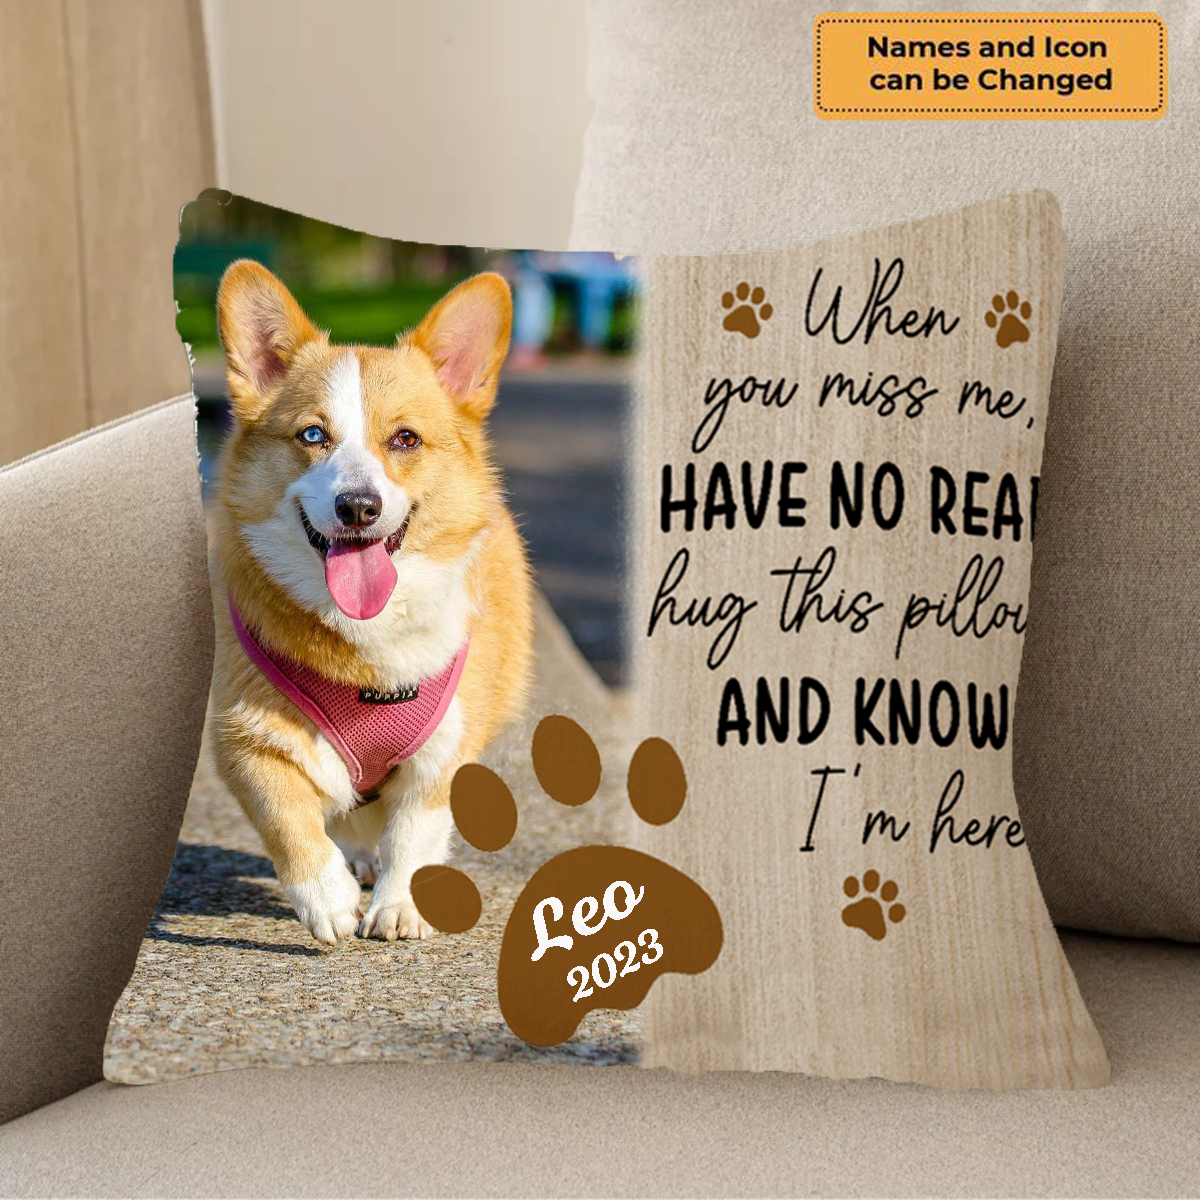 Pet Lover - Custom Photo Hug This Pillow And Know I'm Here - Personalized Pillow